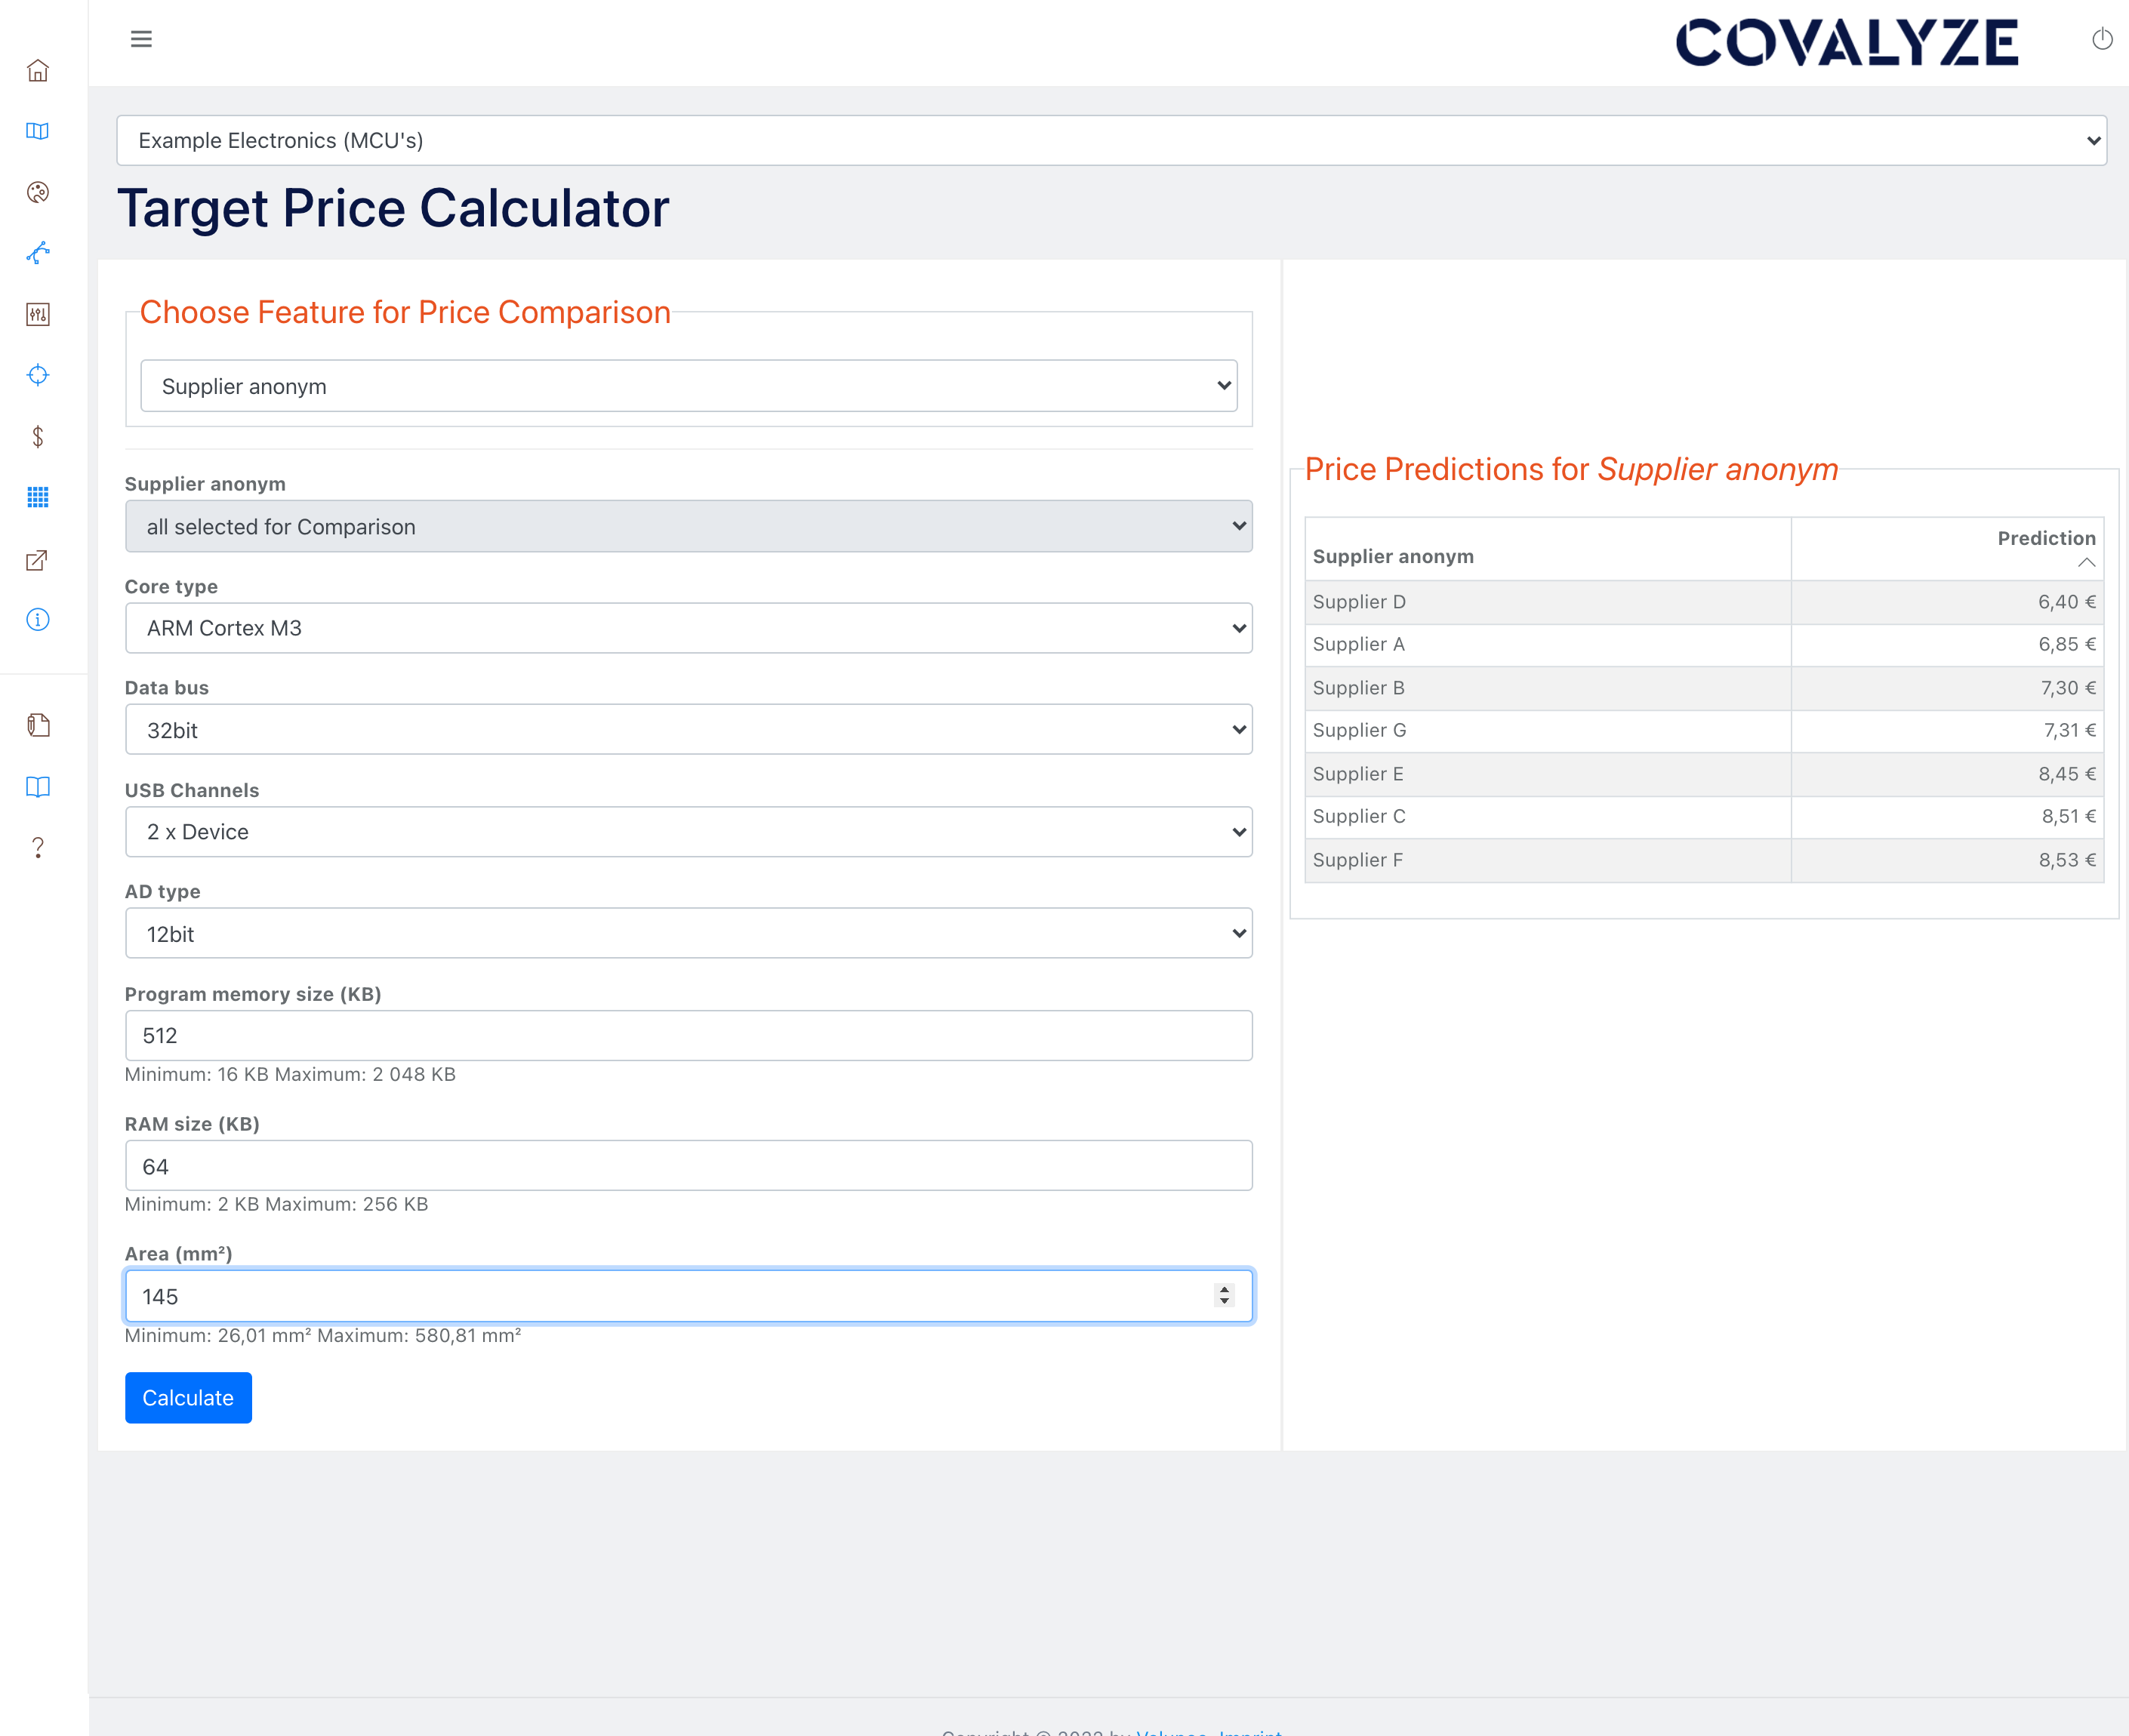 COVALYZE Software - Immediate target price calculation for any new part